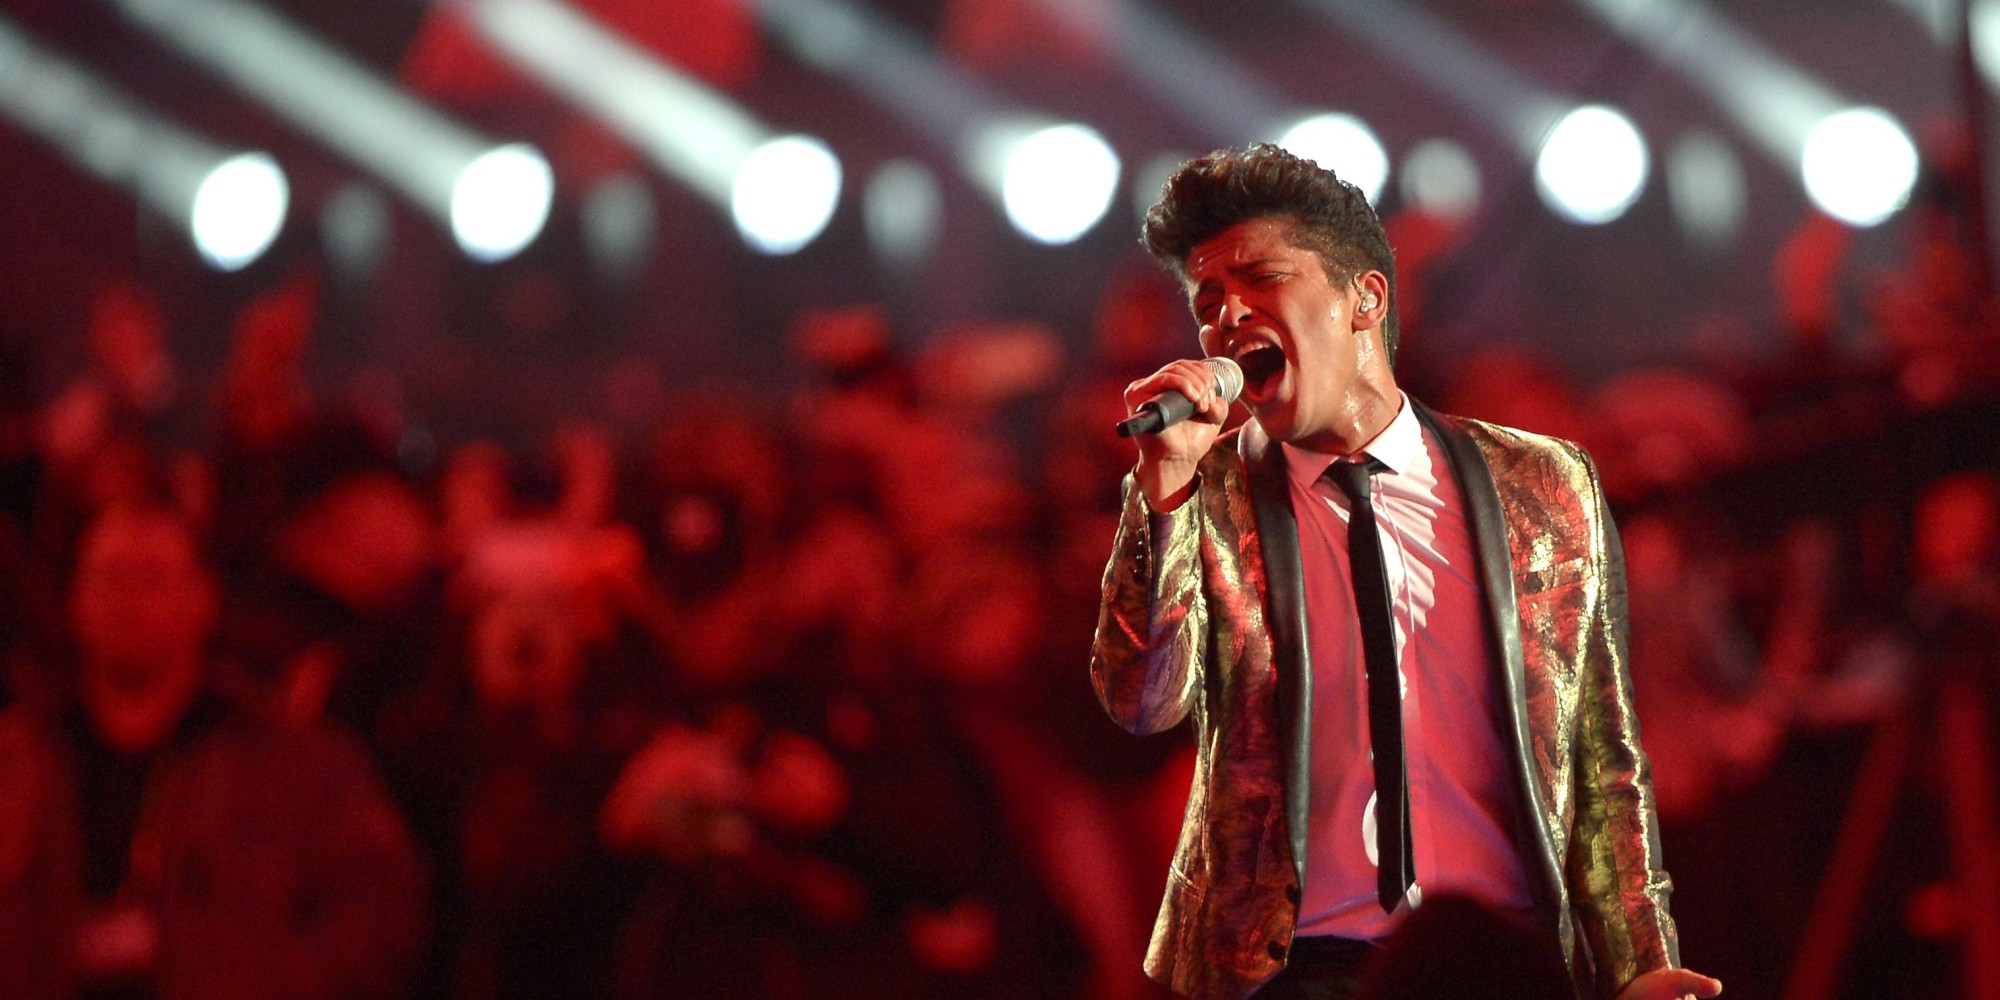 Bruno Mars Sees Increase In Album Sales After Super Bowl Performance |  Music News - Conversations About HER